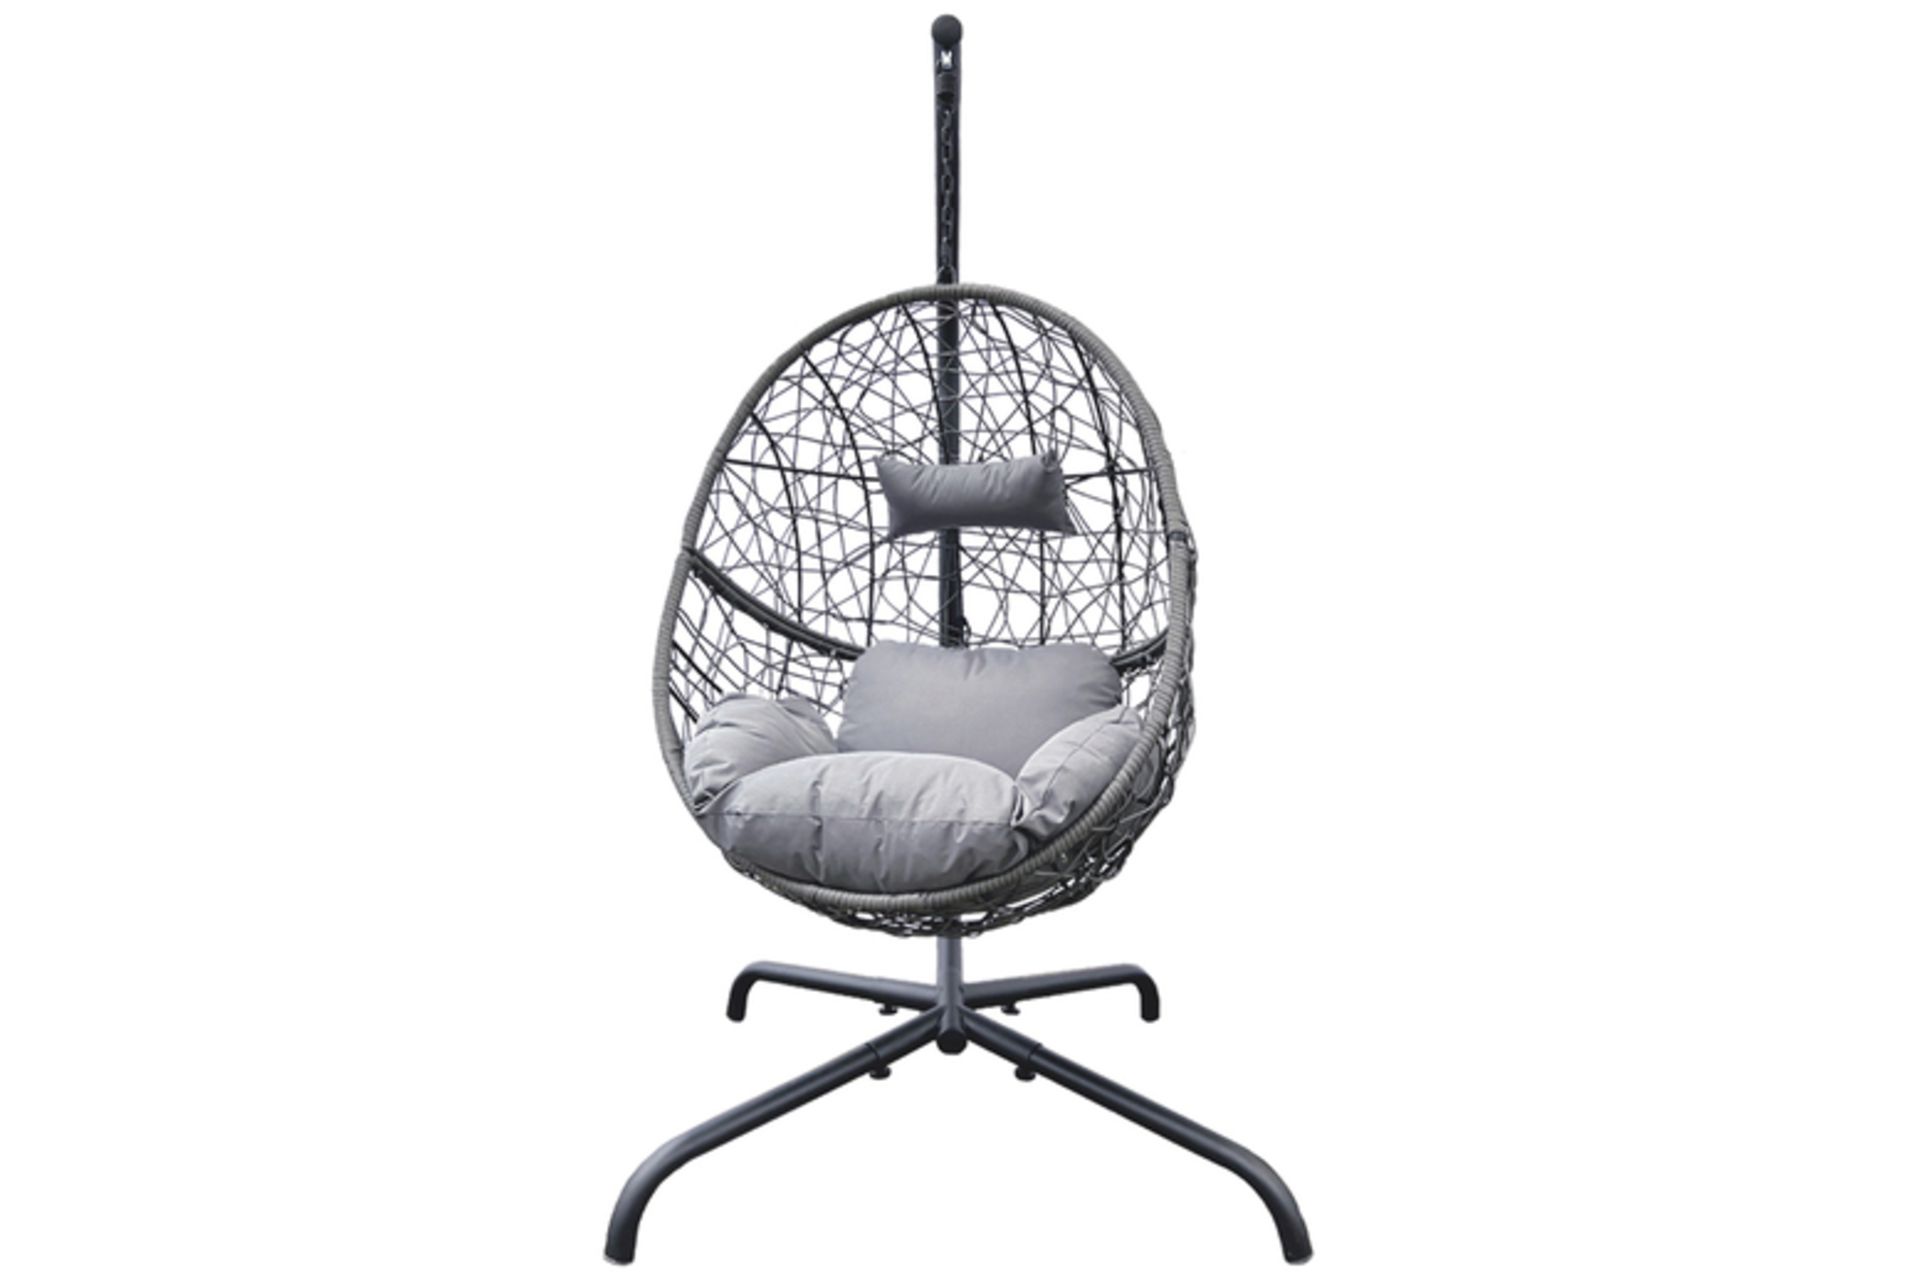 NEW RATTAN HANGING EGG CHAIR WITH A CUSHION AND PILLOW - GREY - Image 2 of 3